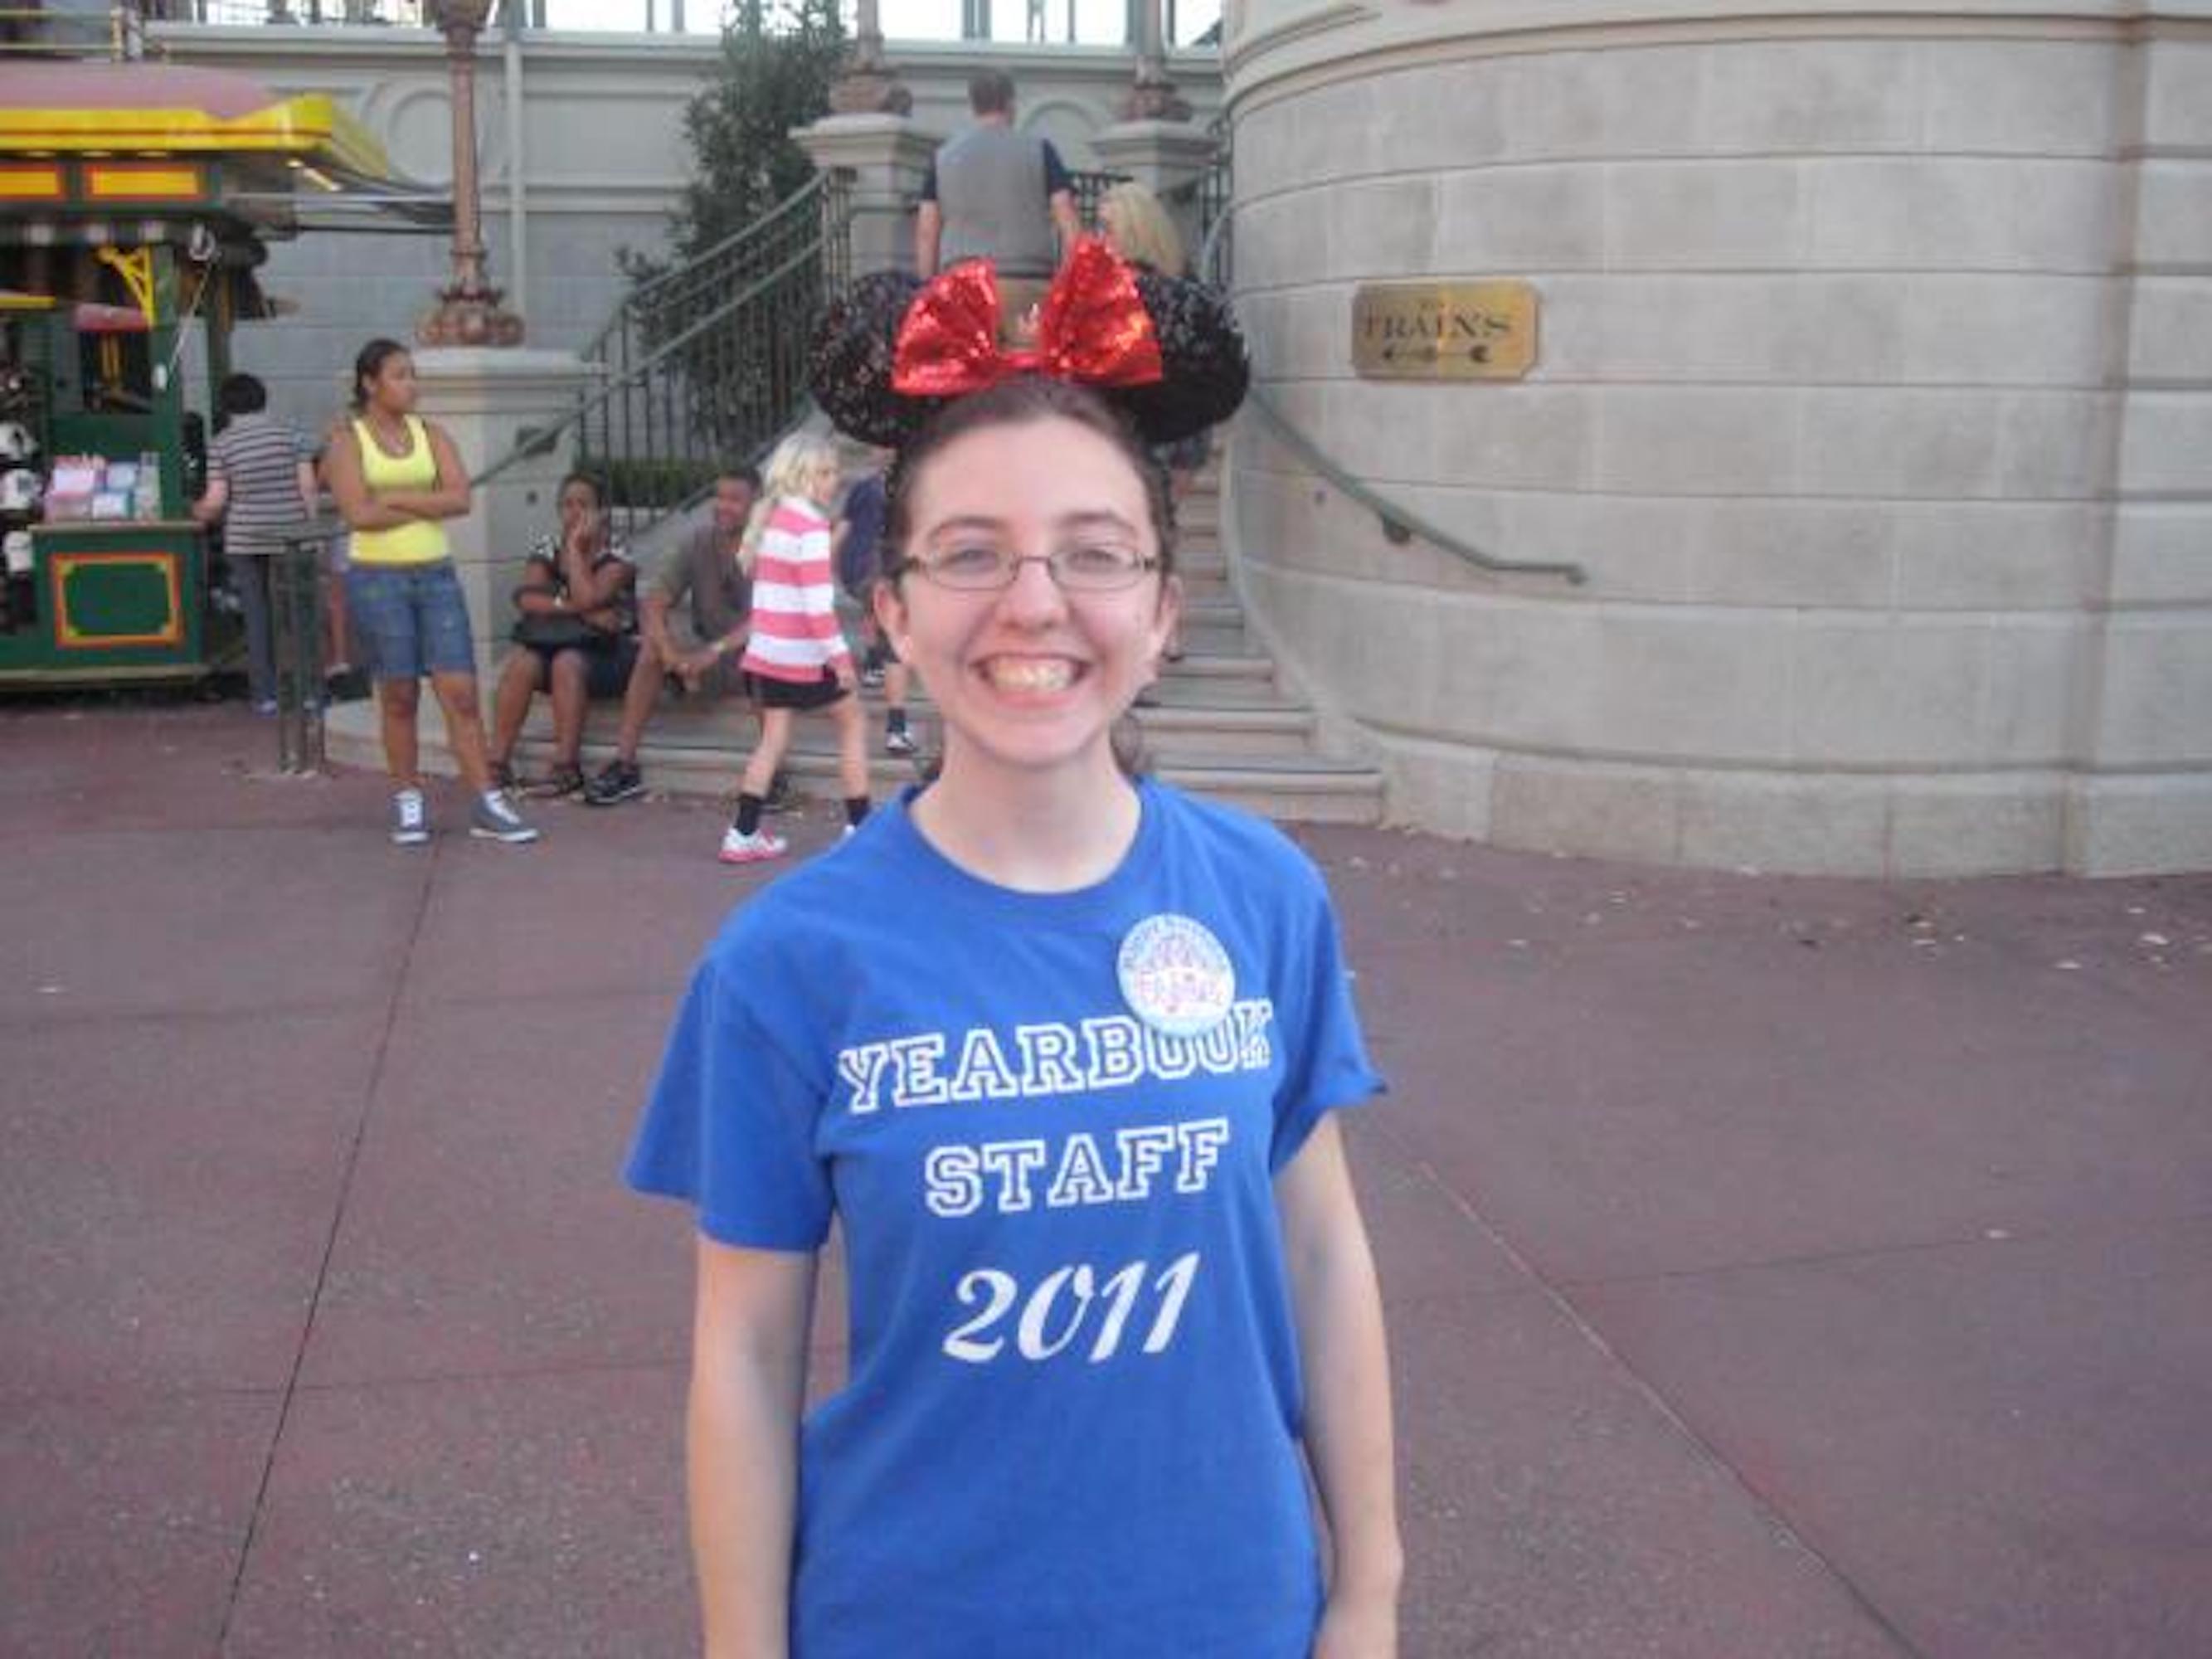 One of Olivia King's most memorable birthdays was her 18th, which was celebrated at Disney World in Orlando.  (Courtesy of Olivia King)